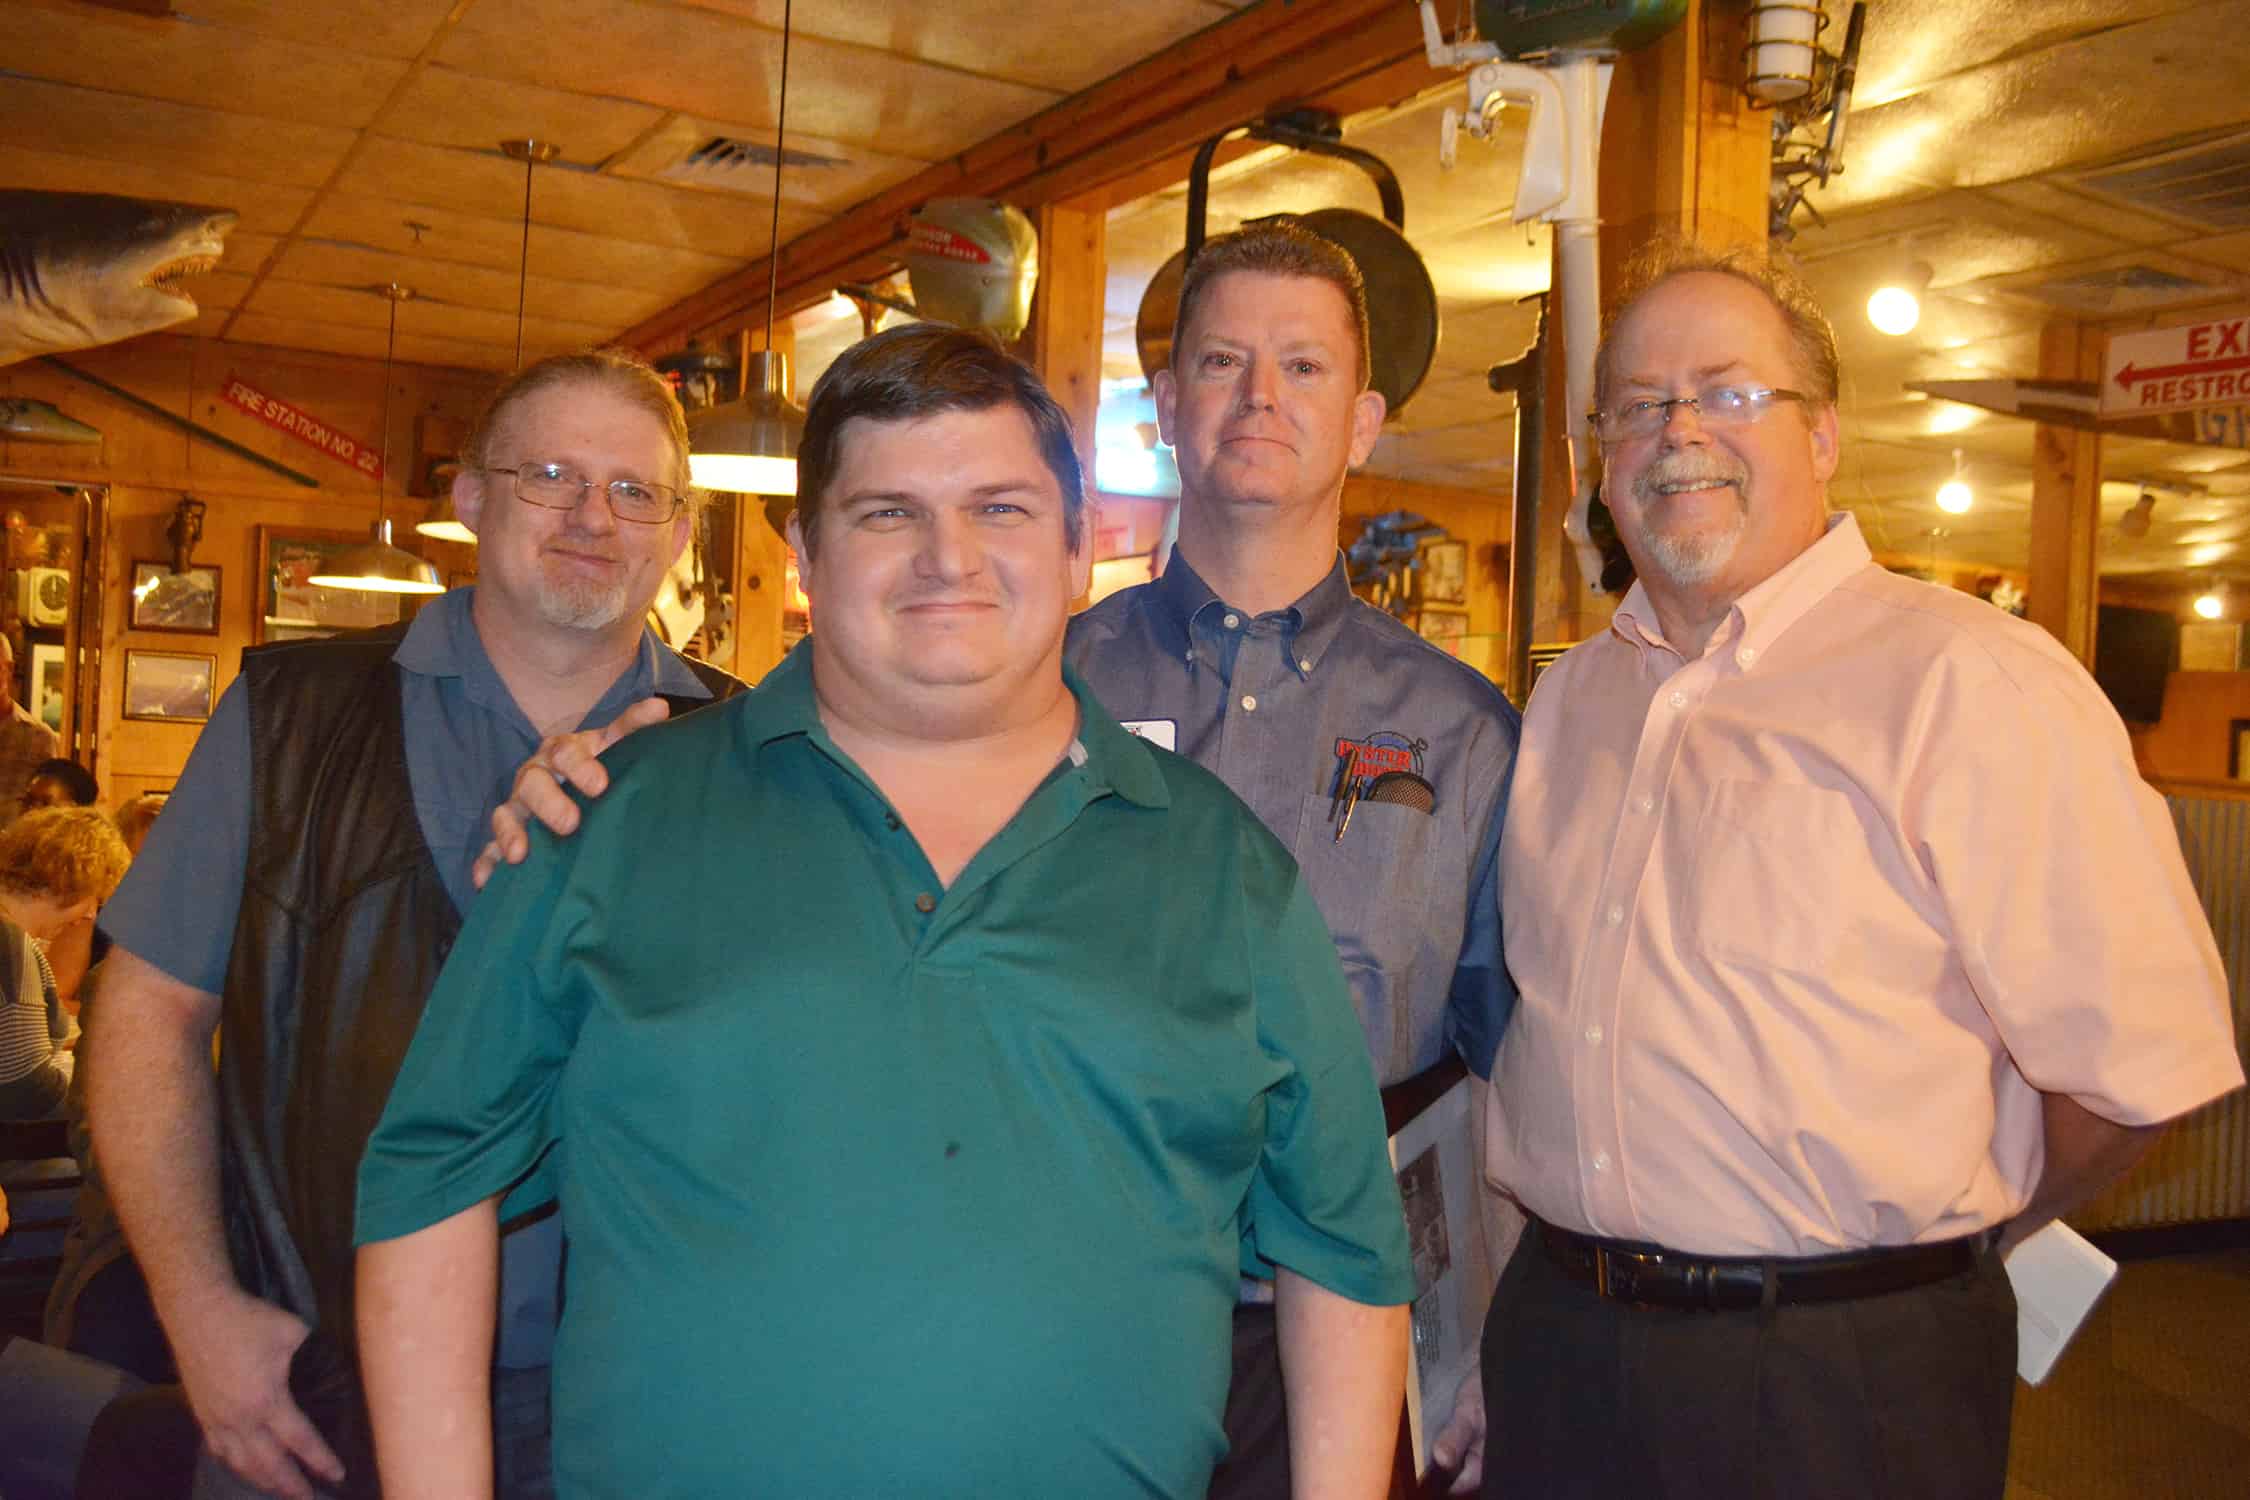 Pictured from left: James Nail, Employee of the Year, Matthew Simmons, Allen Hastings, and Bud Morris.